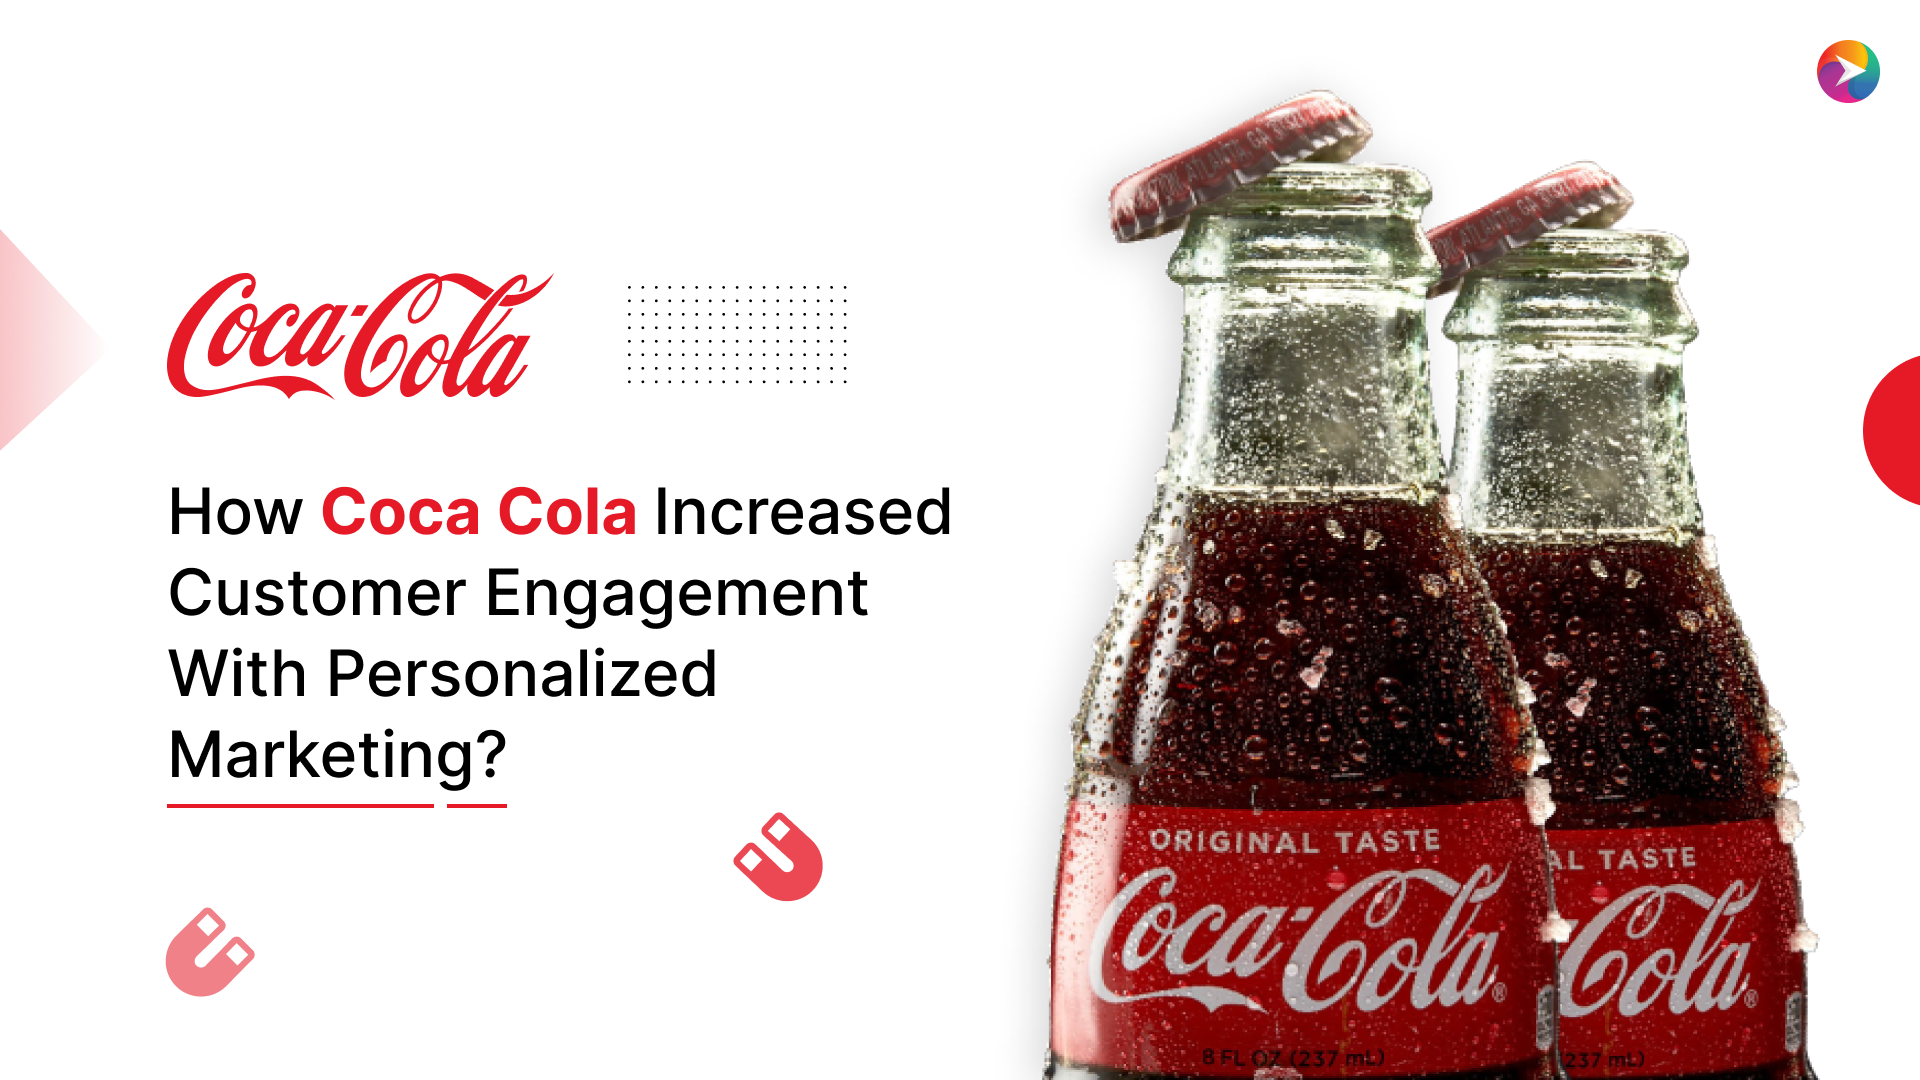 How Coca-Cola Increased Customer Engagement With Personalized Marketing